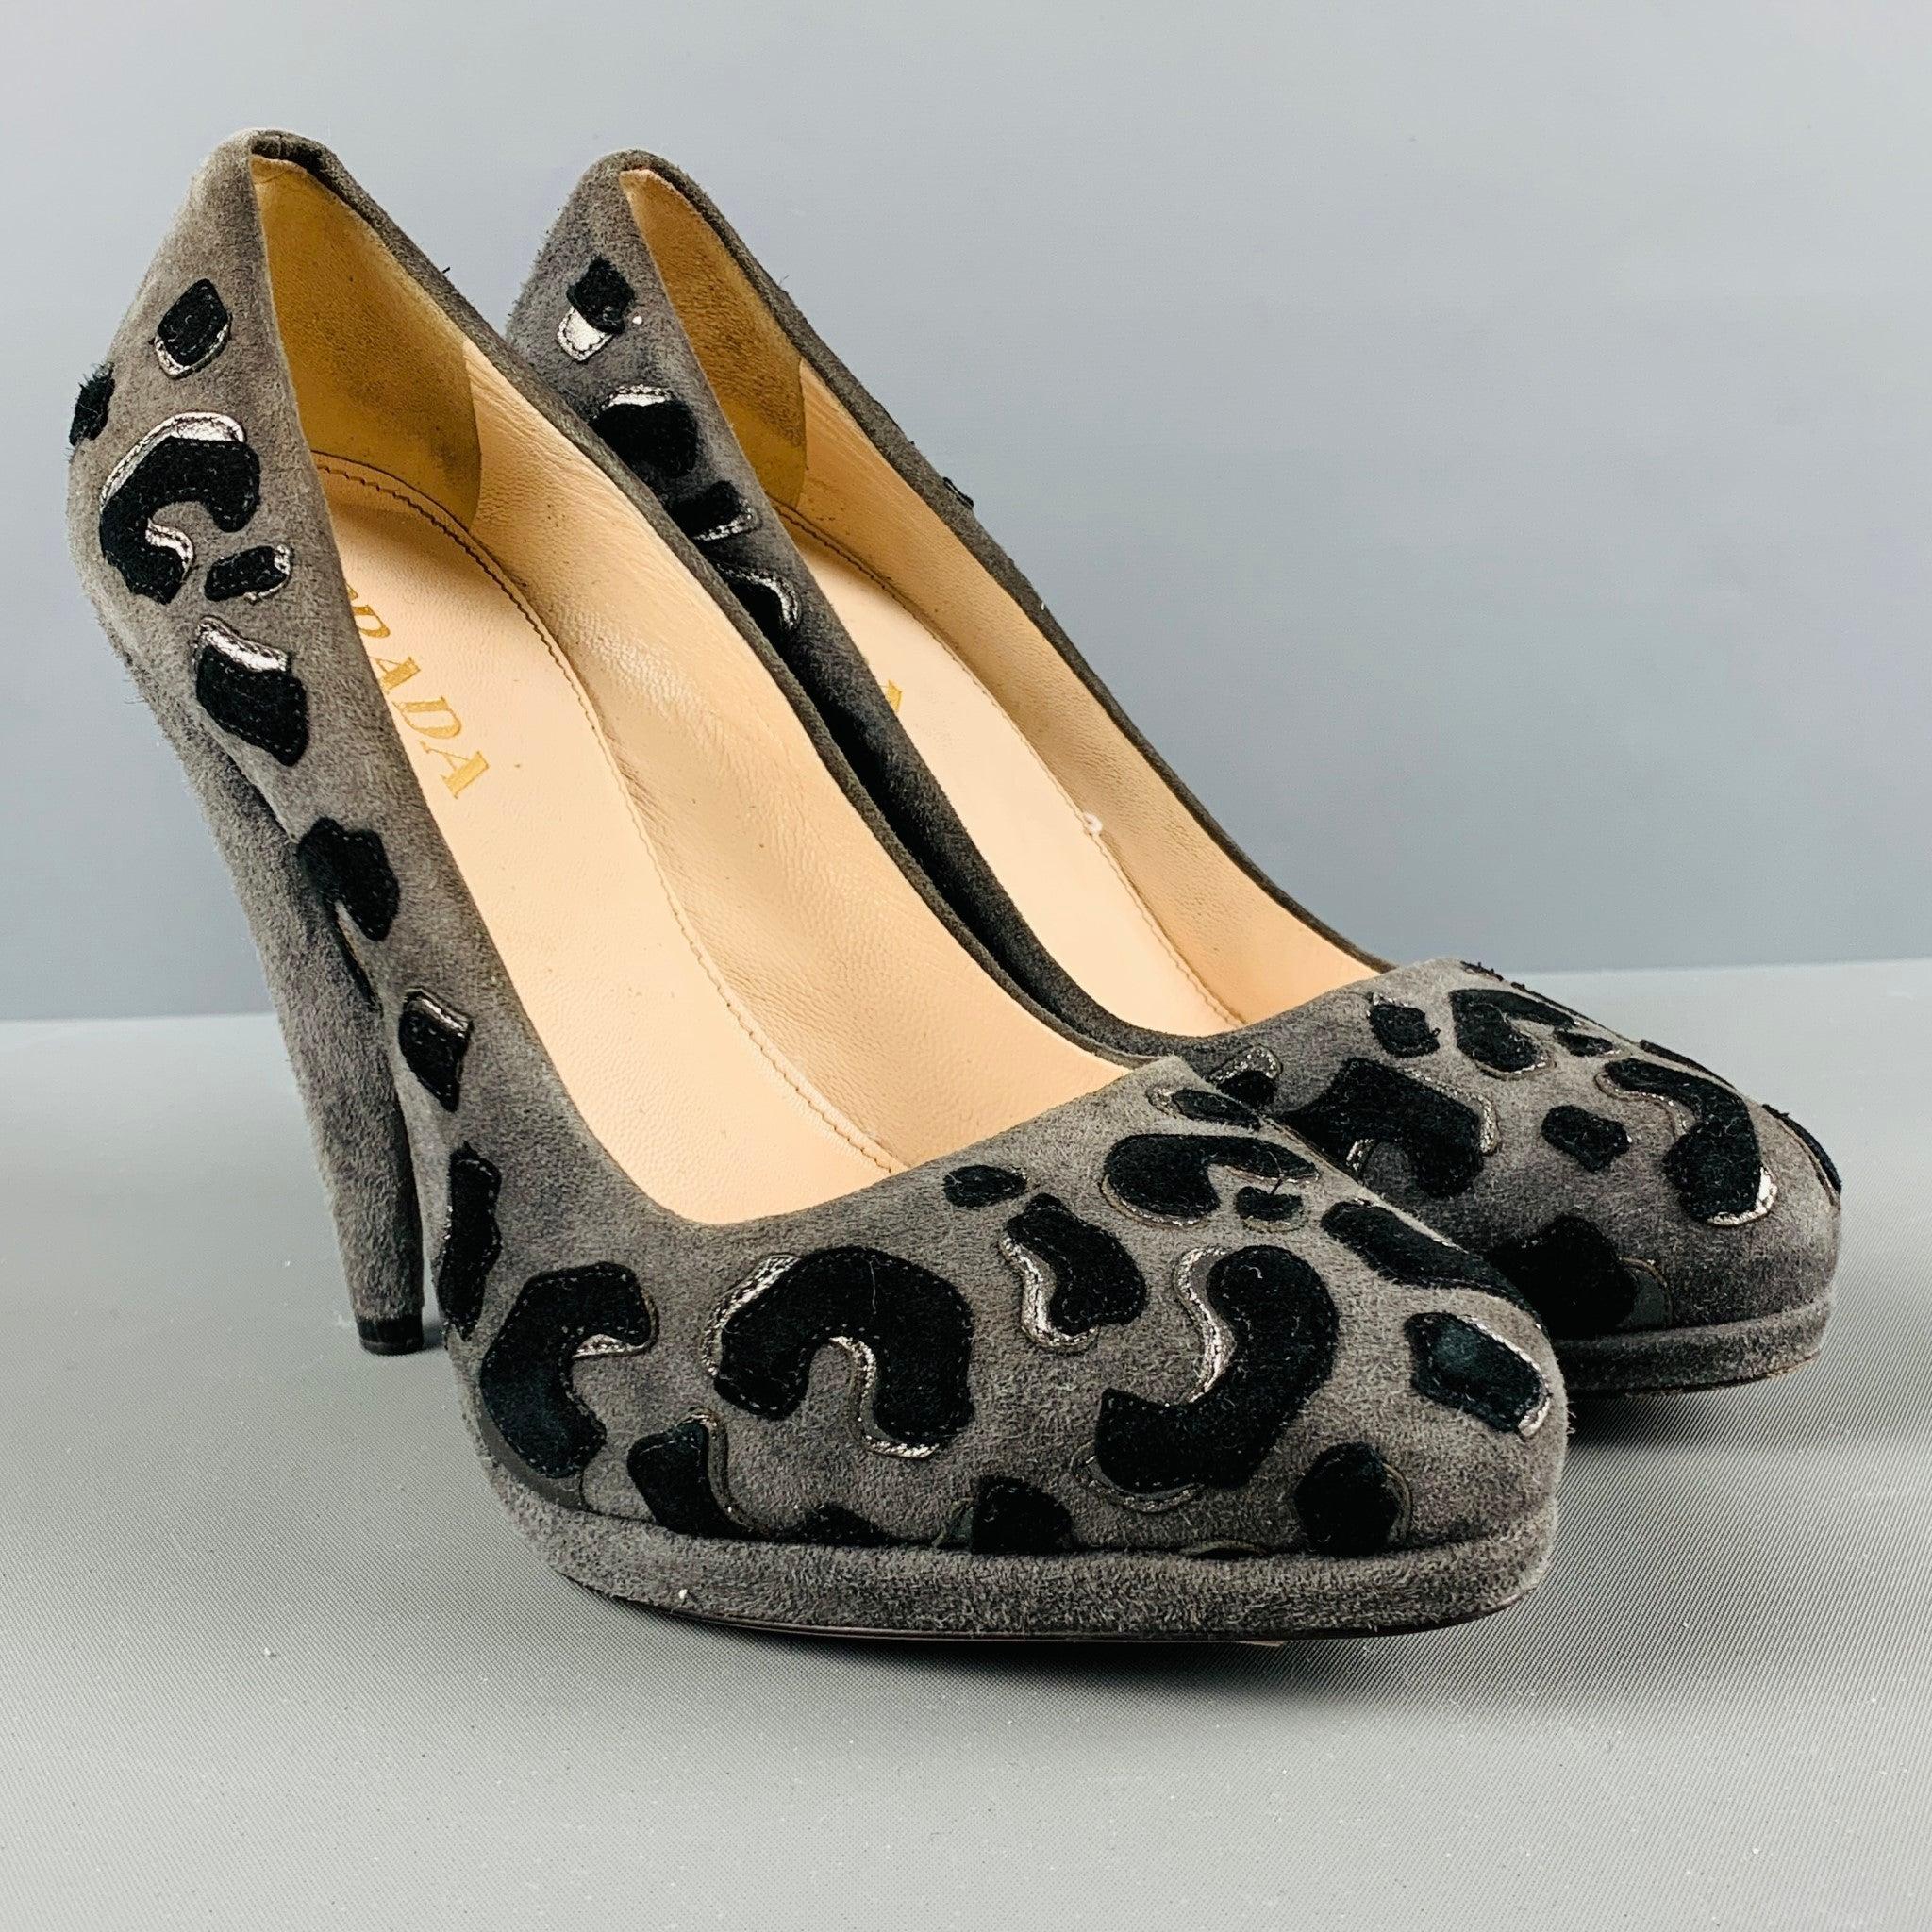 PRADA pumps comes in a black and grey suede featuring leopard applique, platform, and a stacked heel.Comes with dust bag. Made in Italy. Very Good Pre-Owned Condition. 

Marked:   35 

Measurements: 
  Heel: 4.5 inches  
  
  
 
Reference No.: